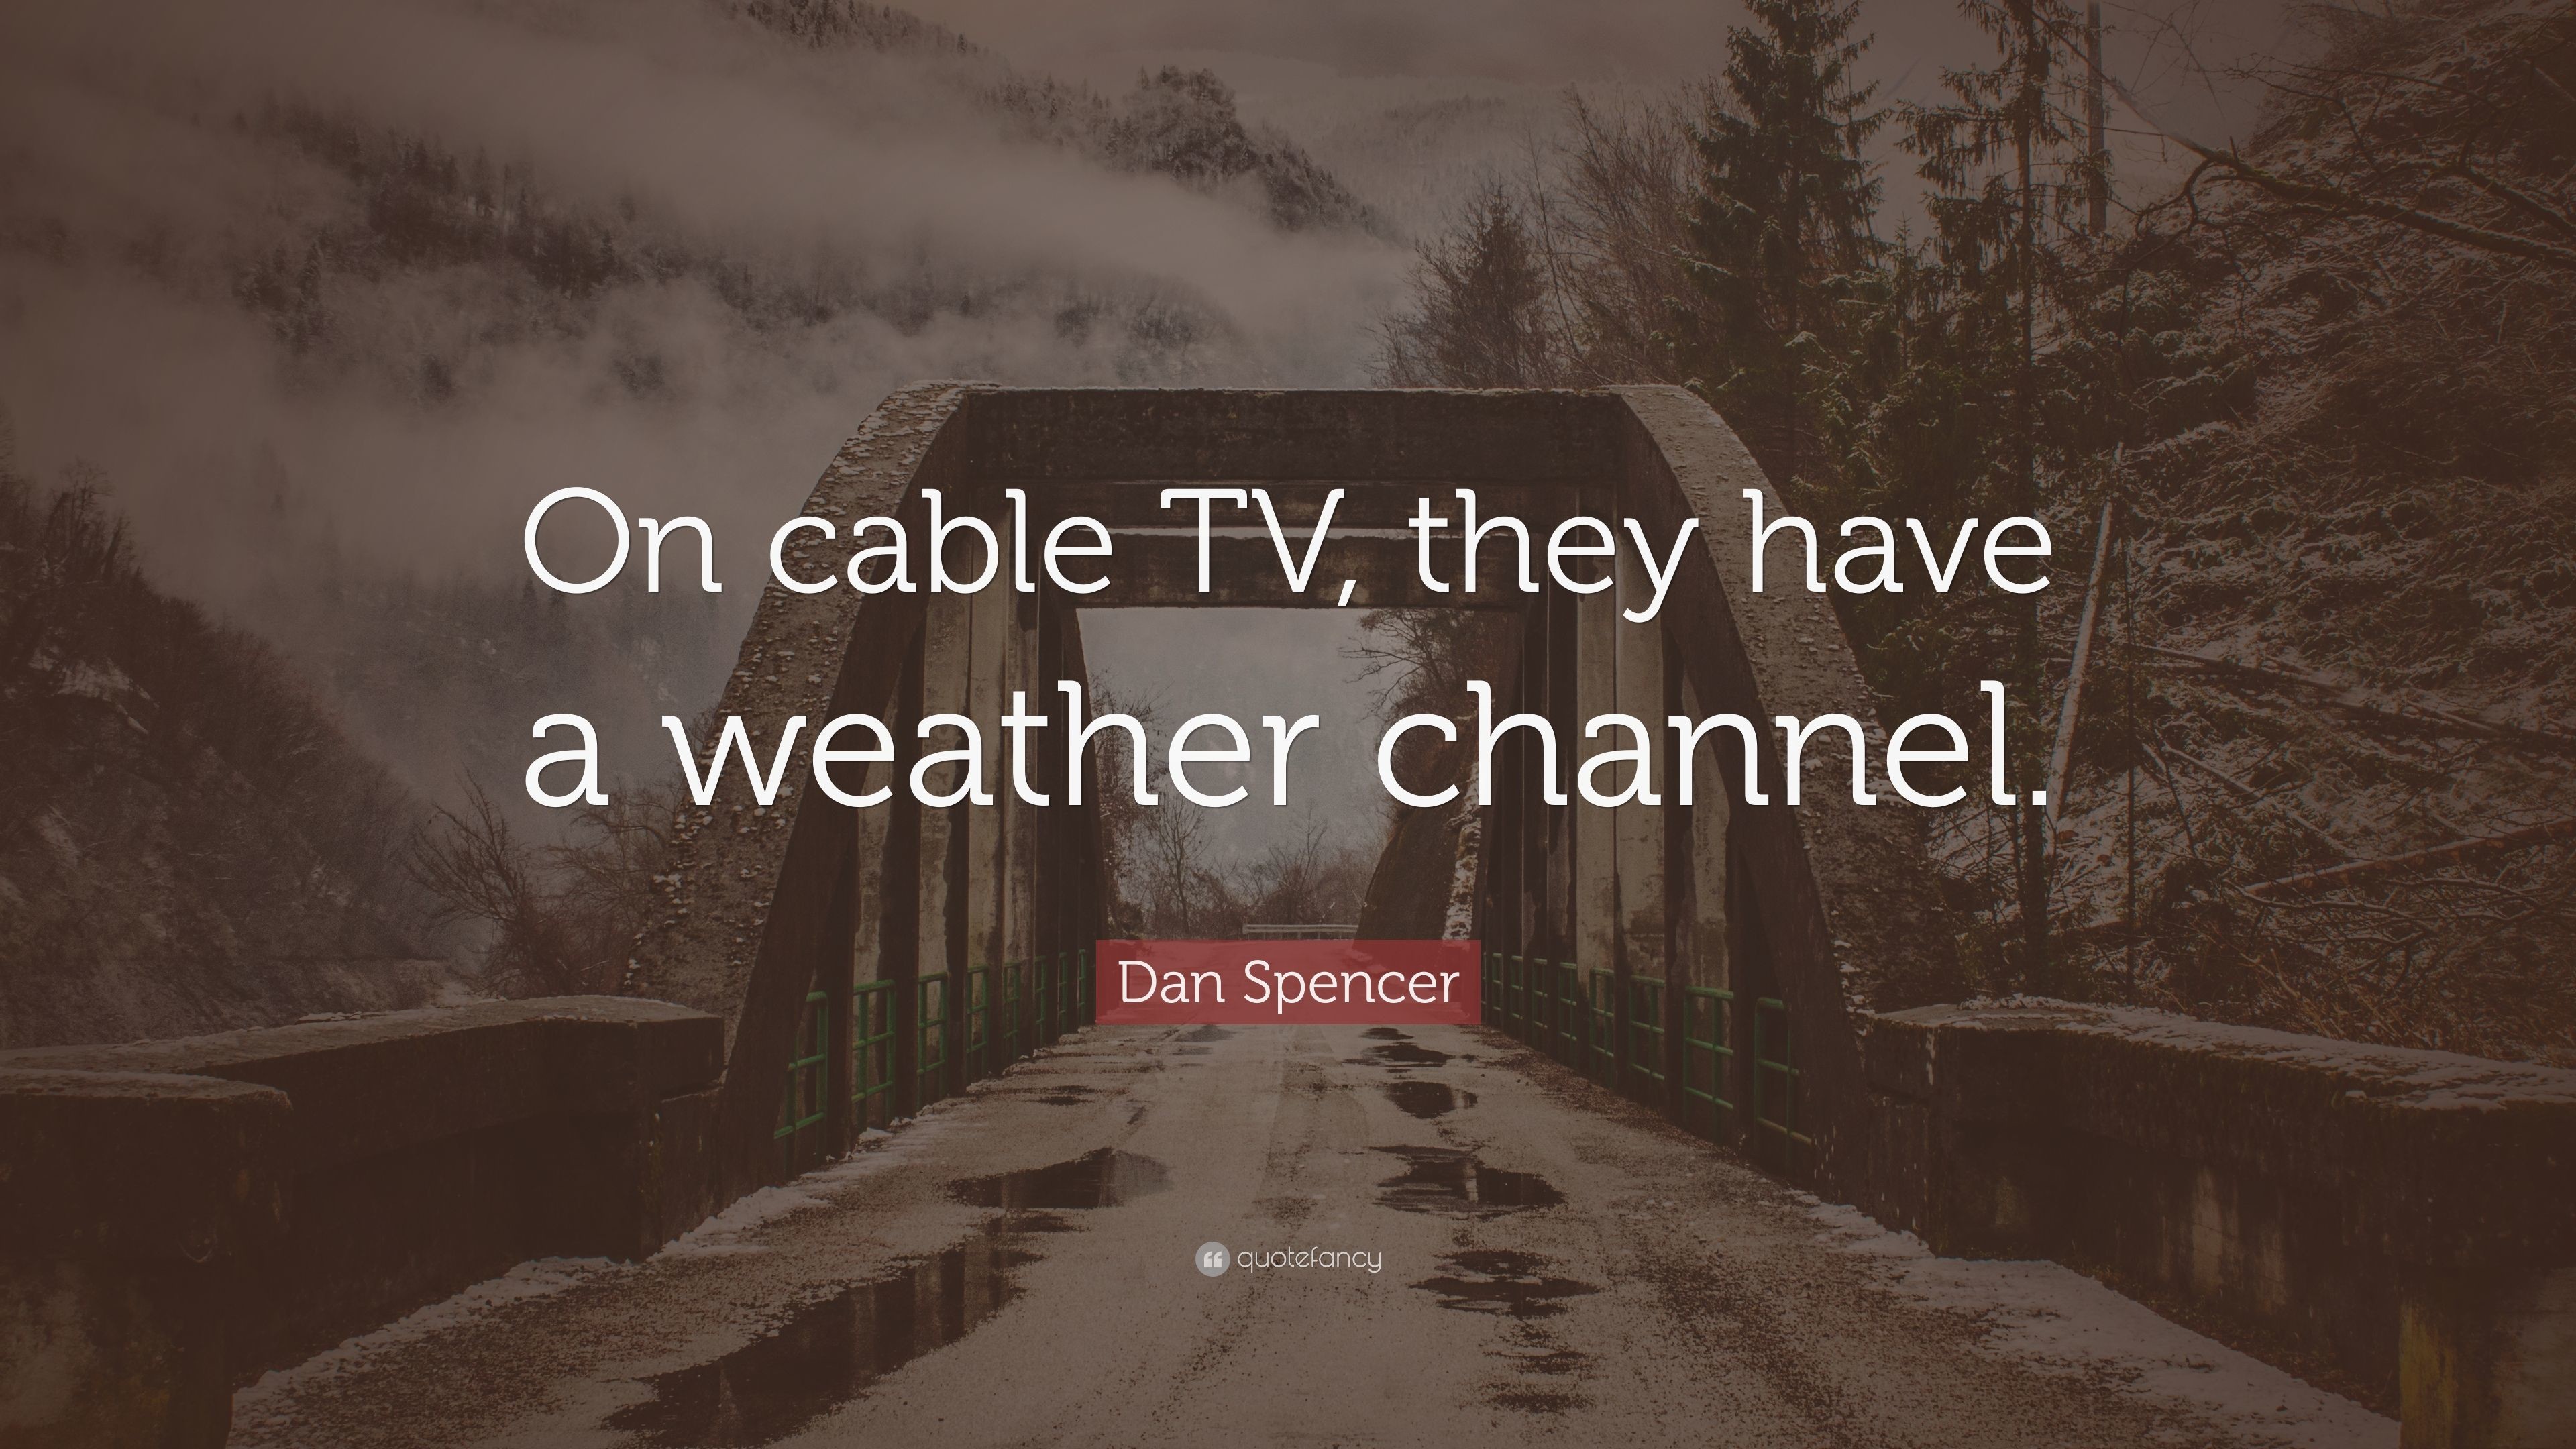 3840x2160 Dan Spencer Quote: “On cable TV, they have a weather channel.”